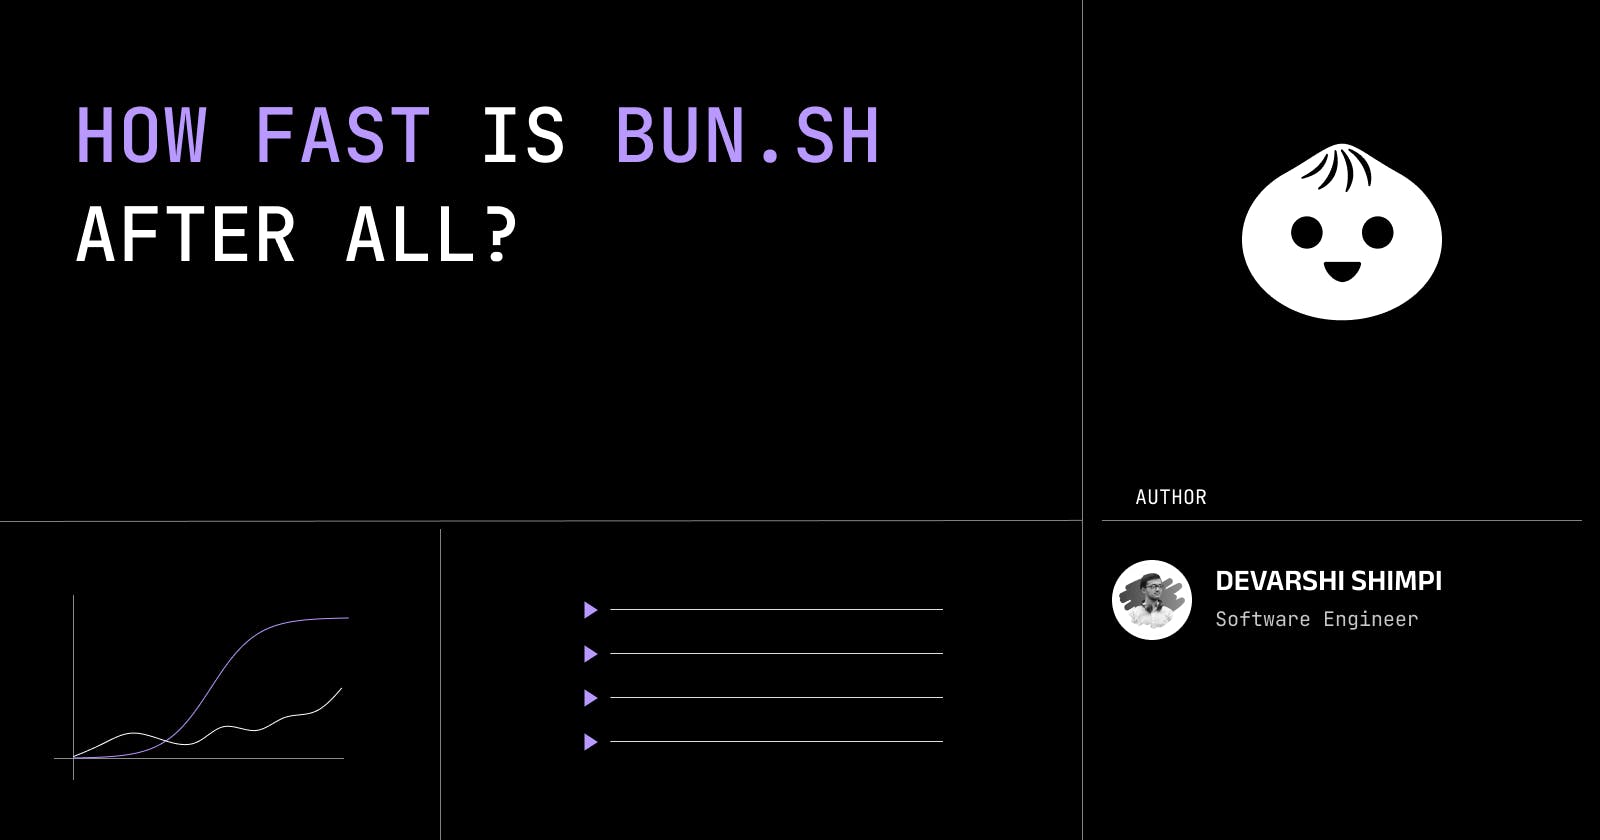 How Fast Is Bun.sh After All?